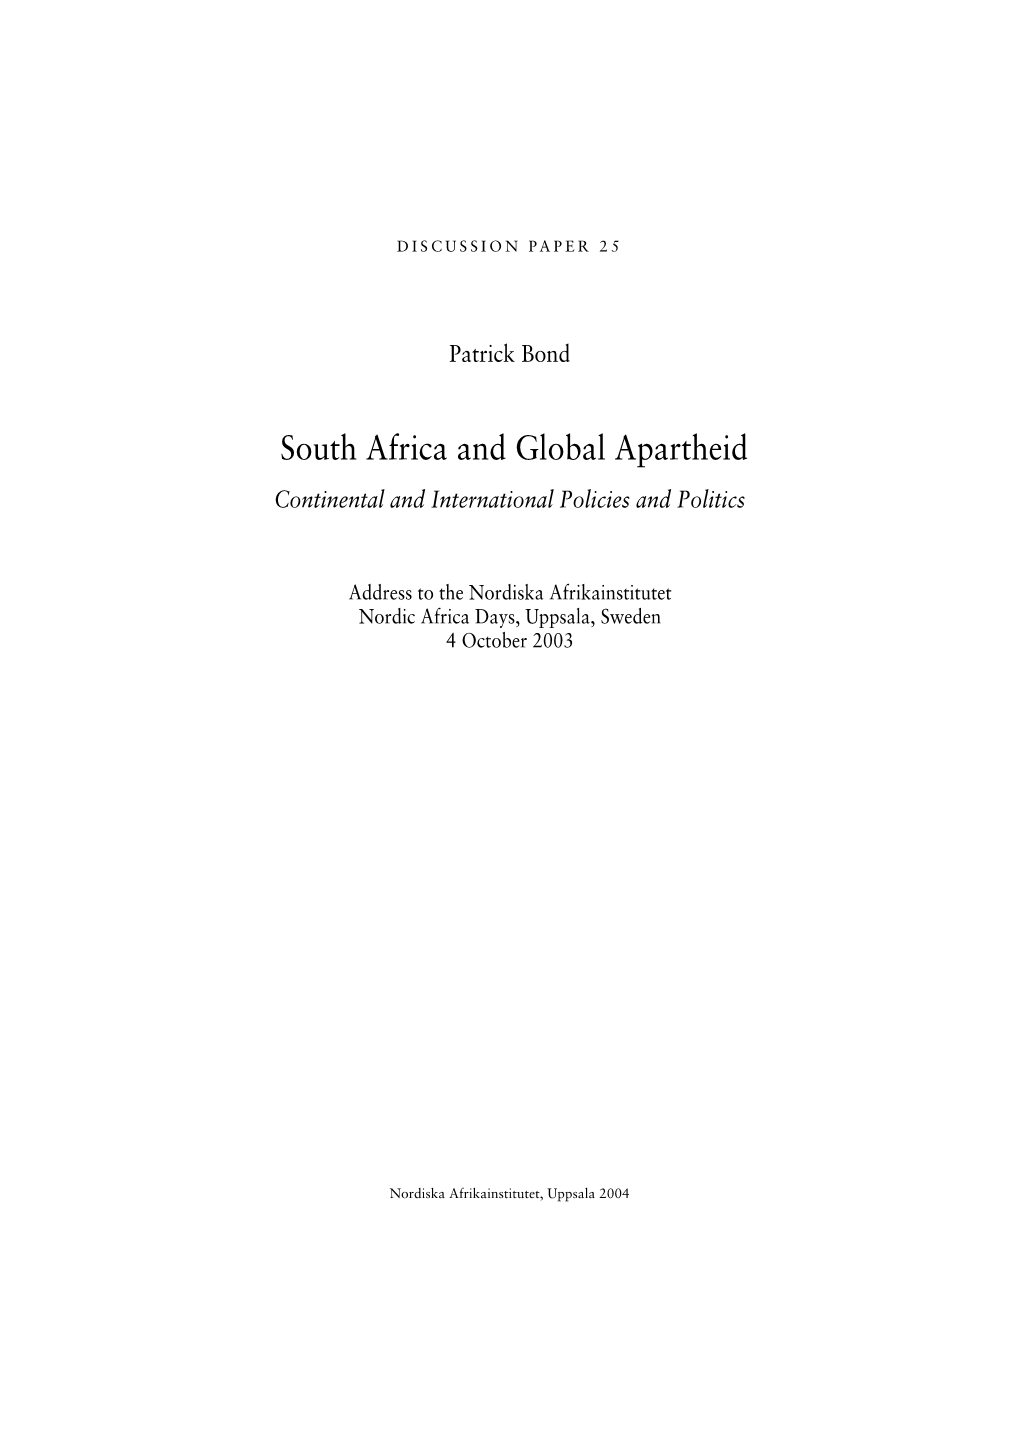 South Africa and Global Apartheid Continental and International Policies and Politics